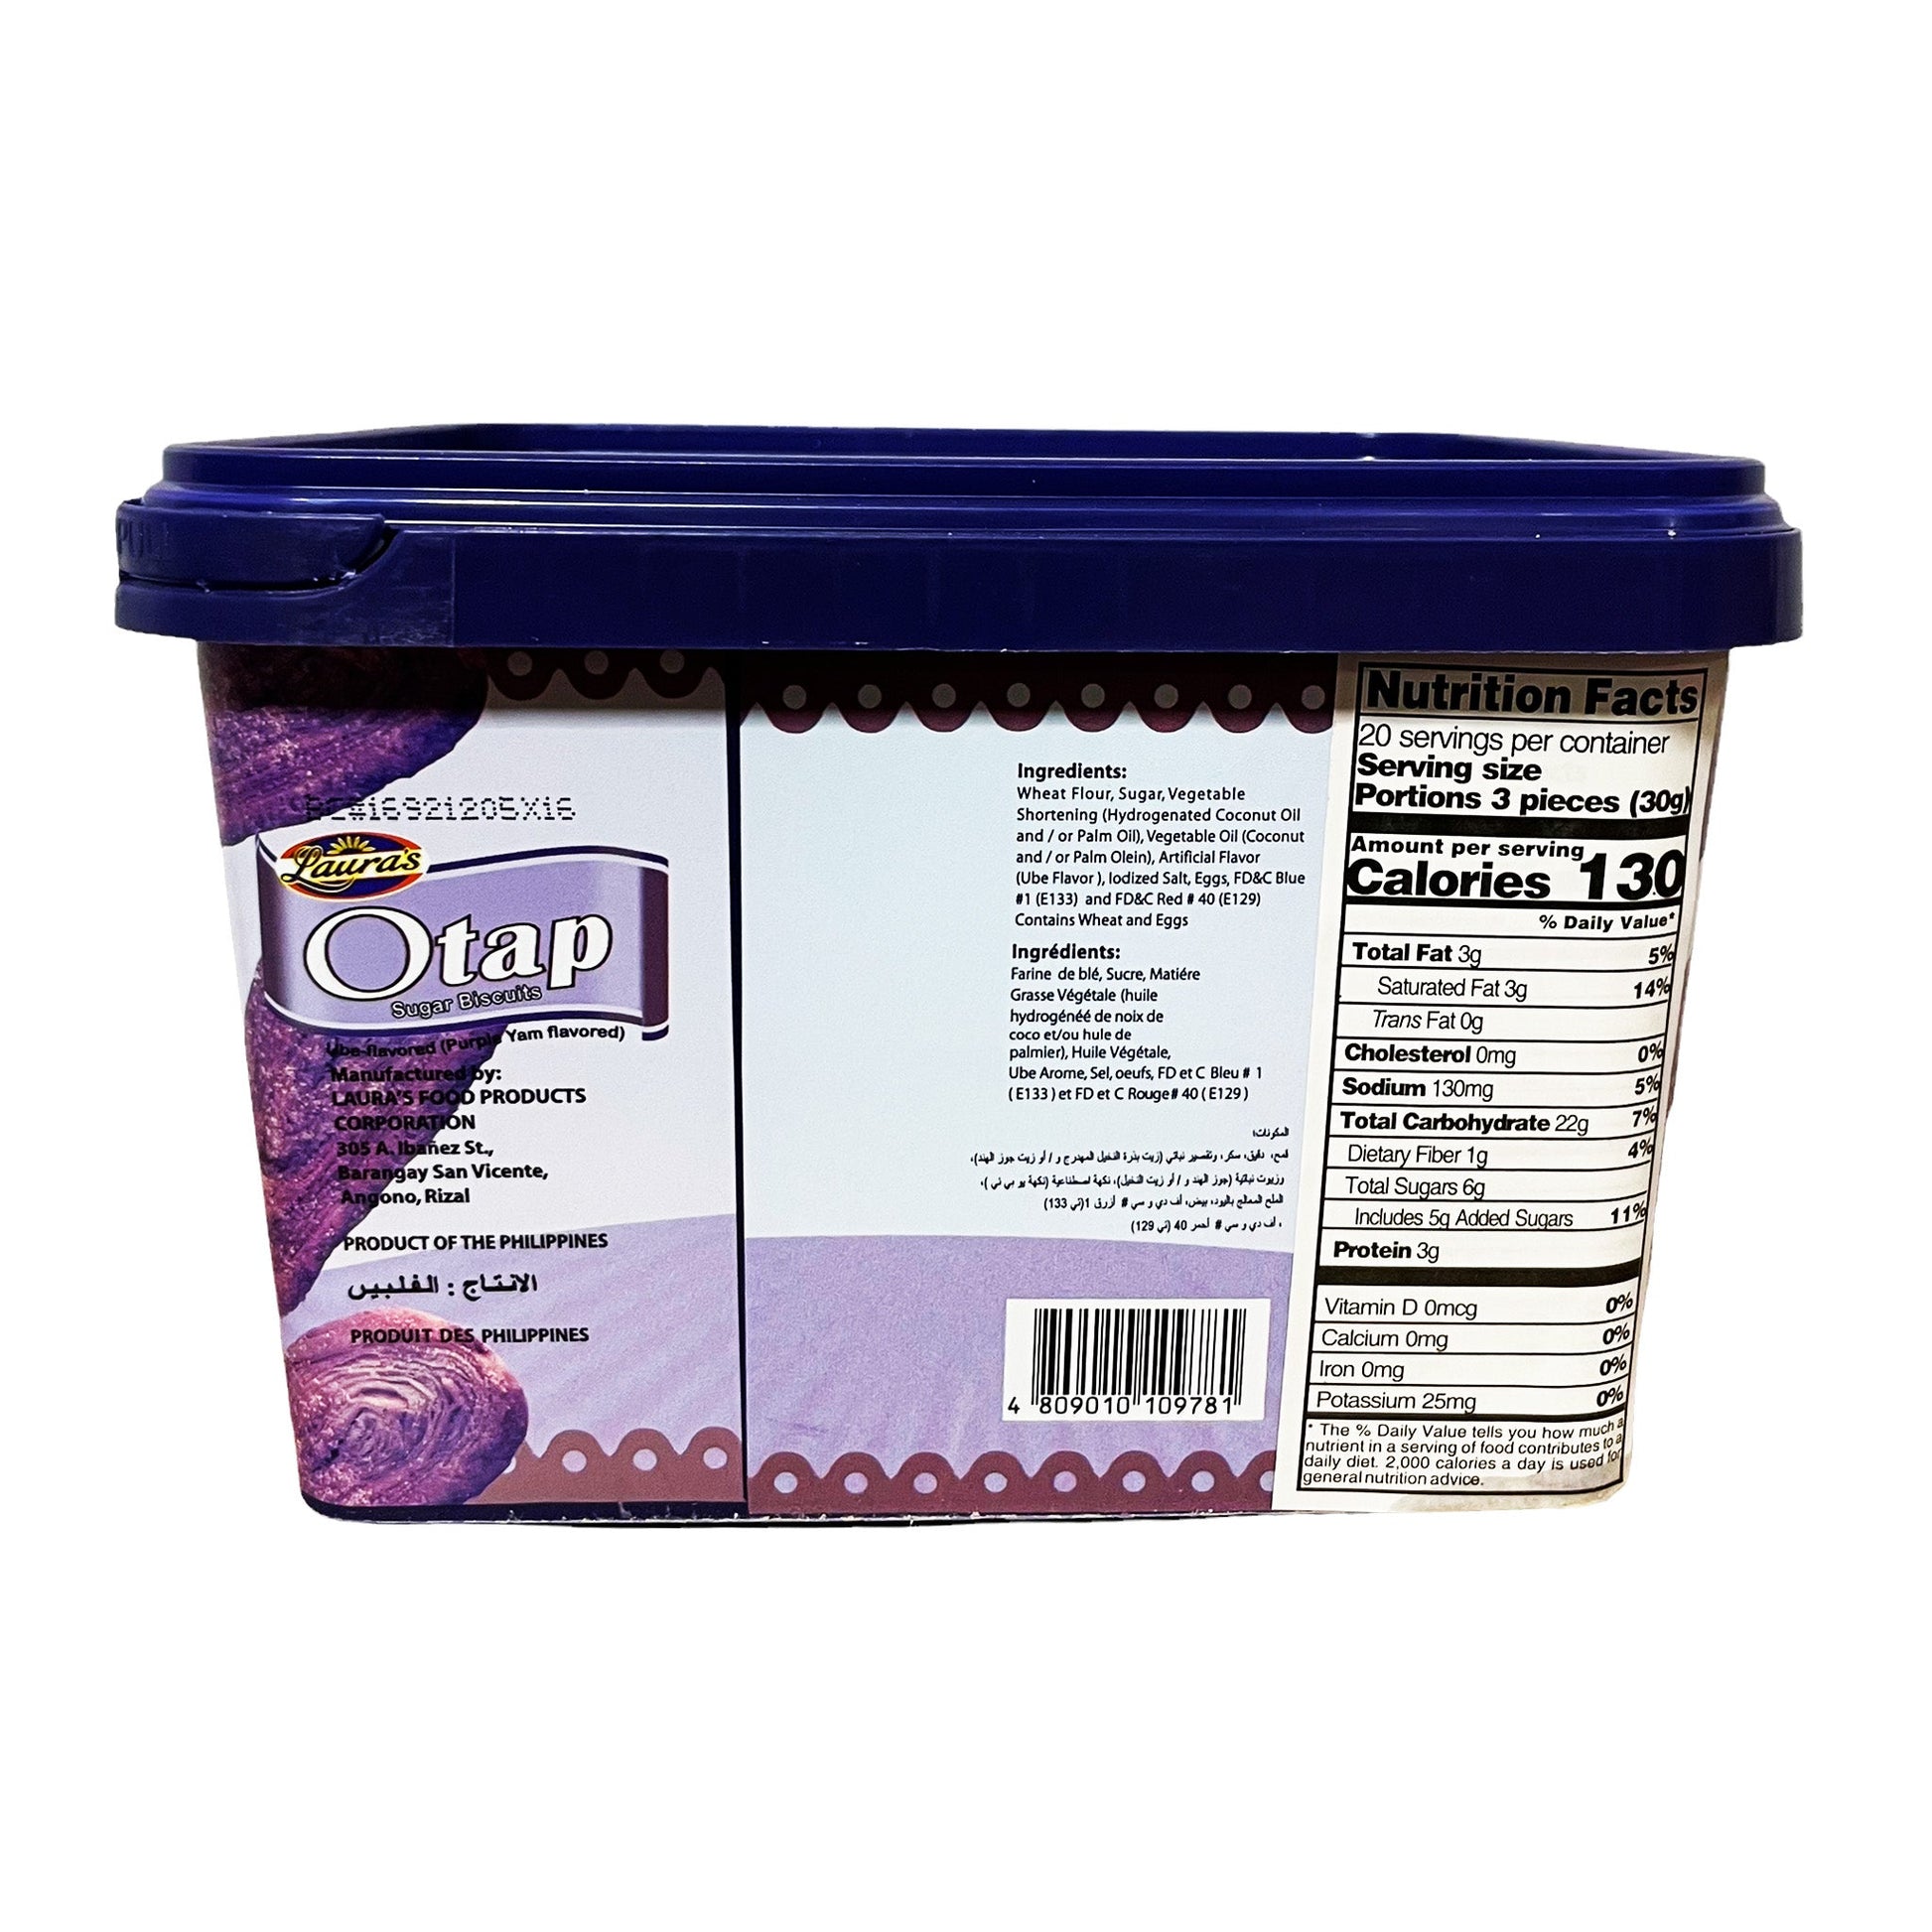 Back graphic image of Laura's Sugar Biscuits Otap In Can - Ube Flavor 21.1oz